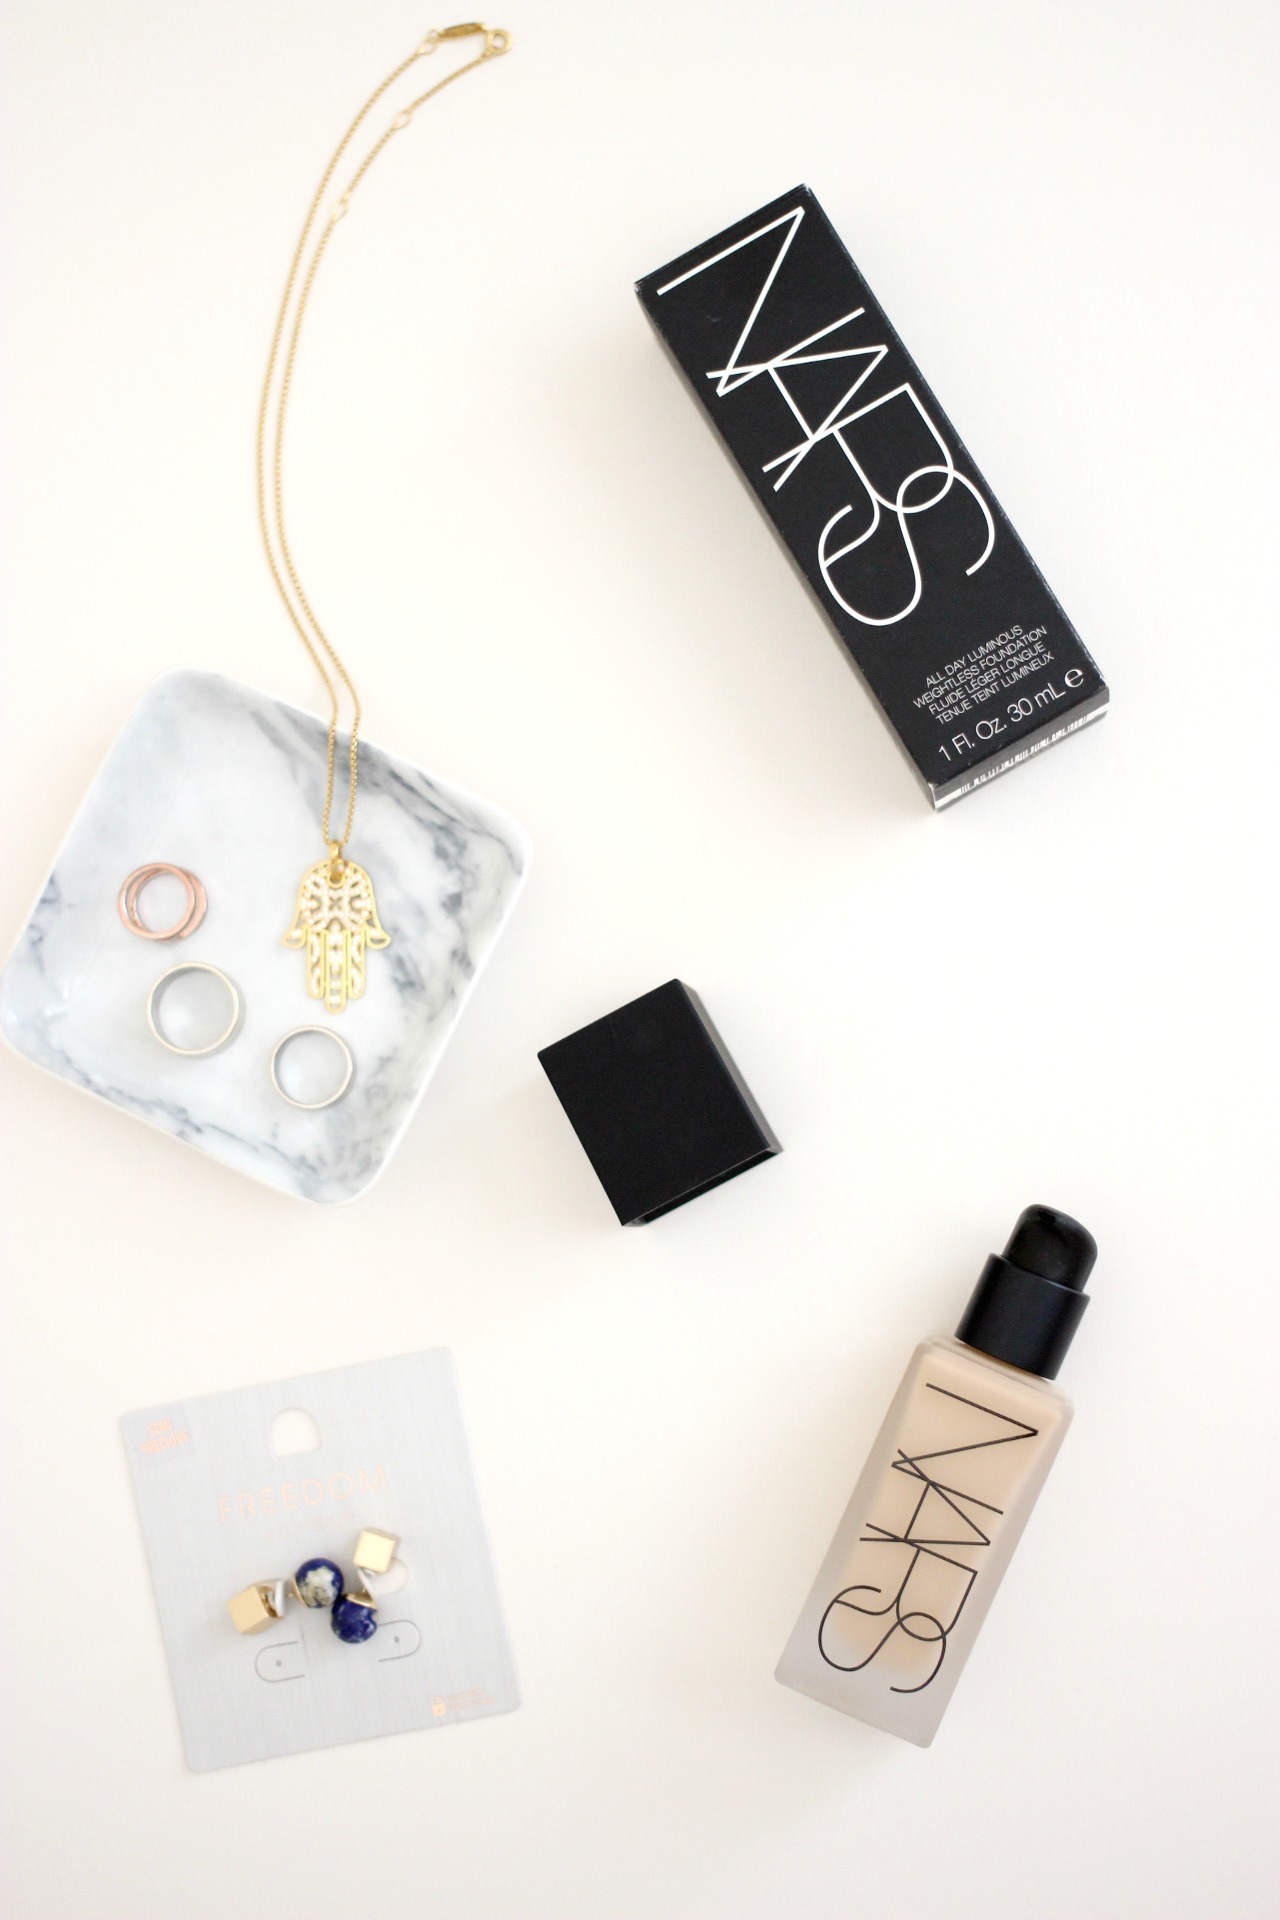 Nars All Day Luminous Weightless foundation santa fe swatches